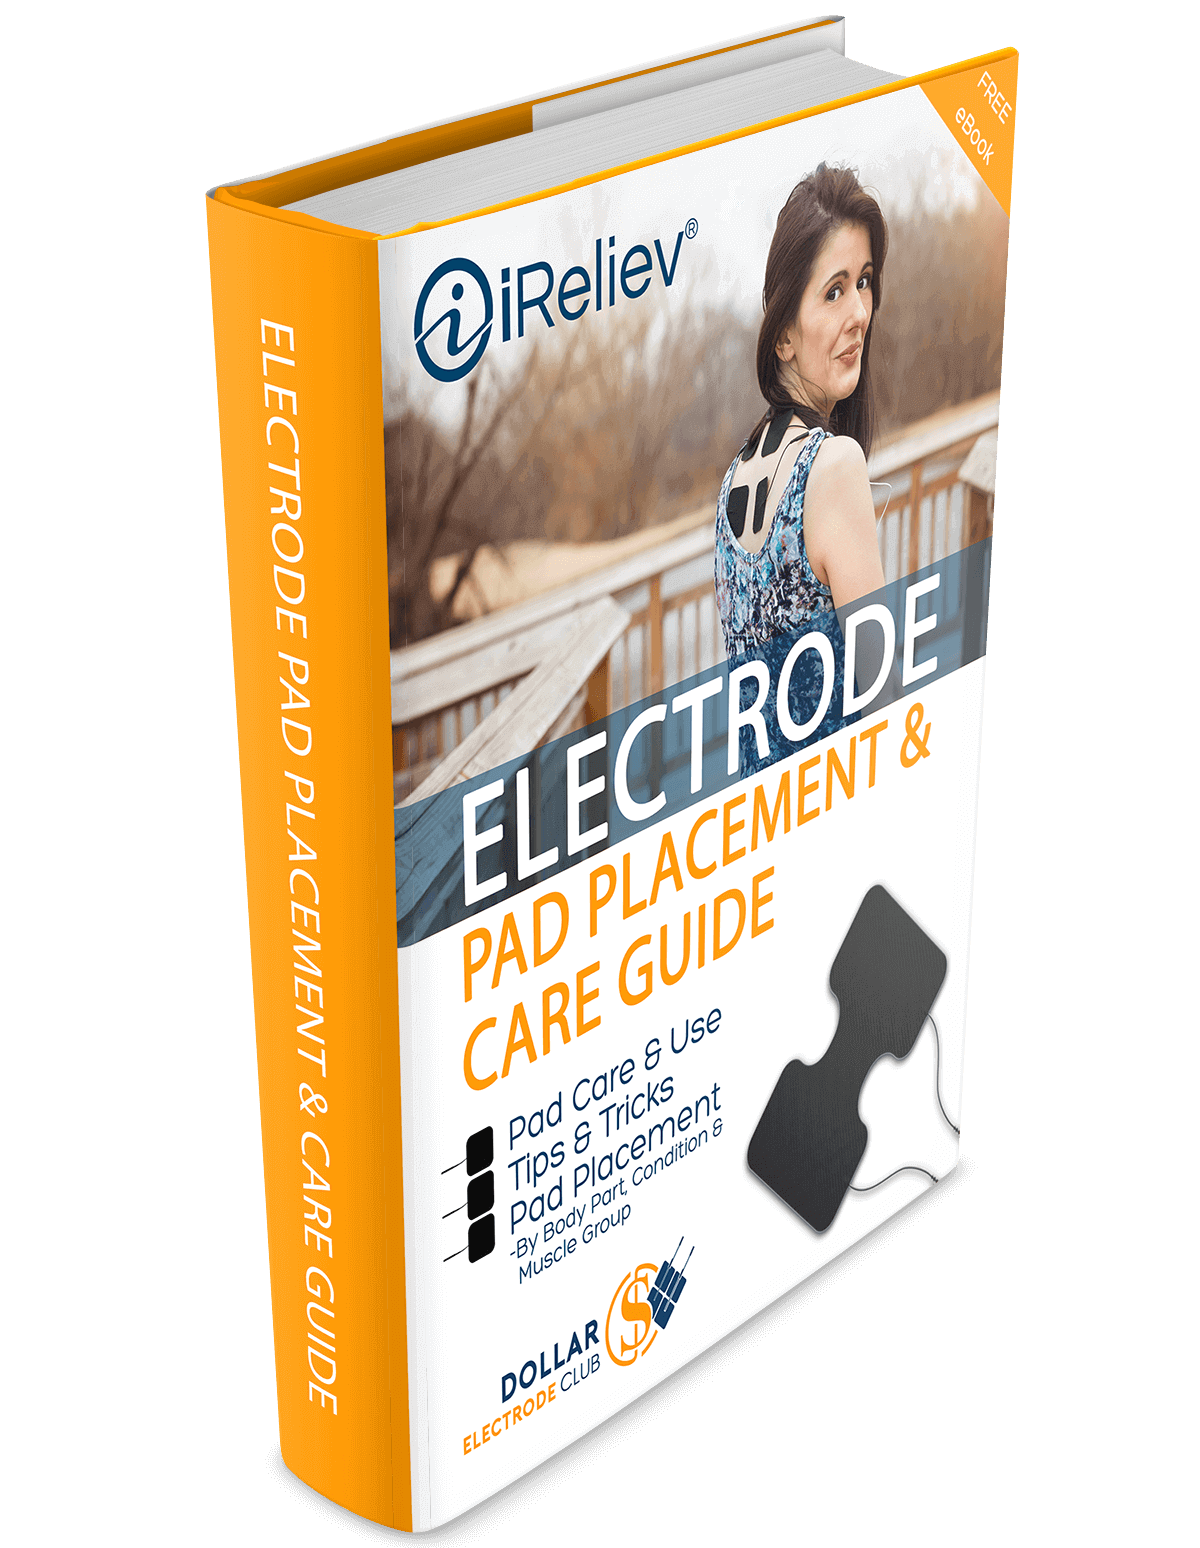 Electrode Pad Placement & Care Guide